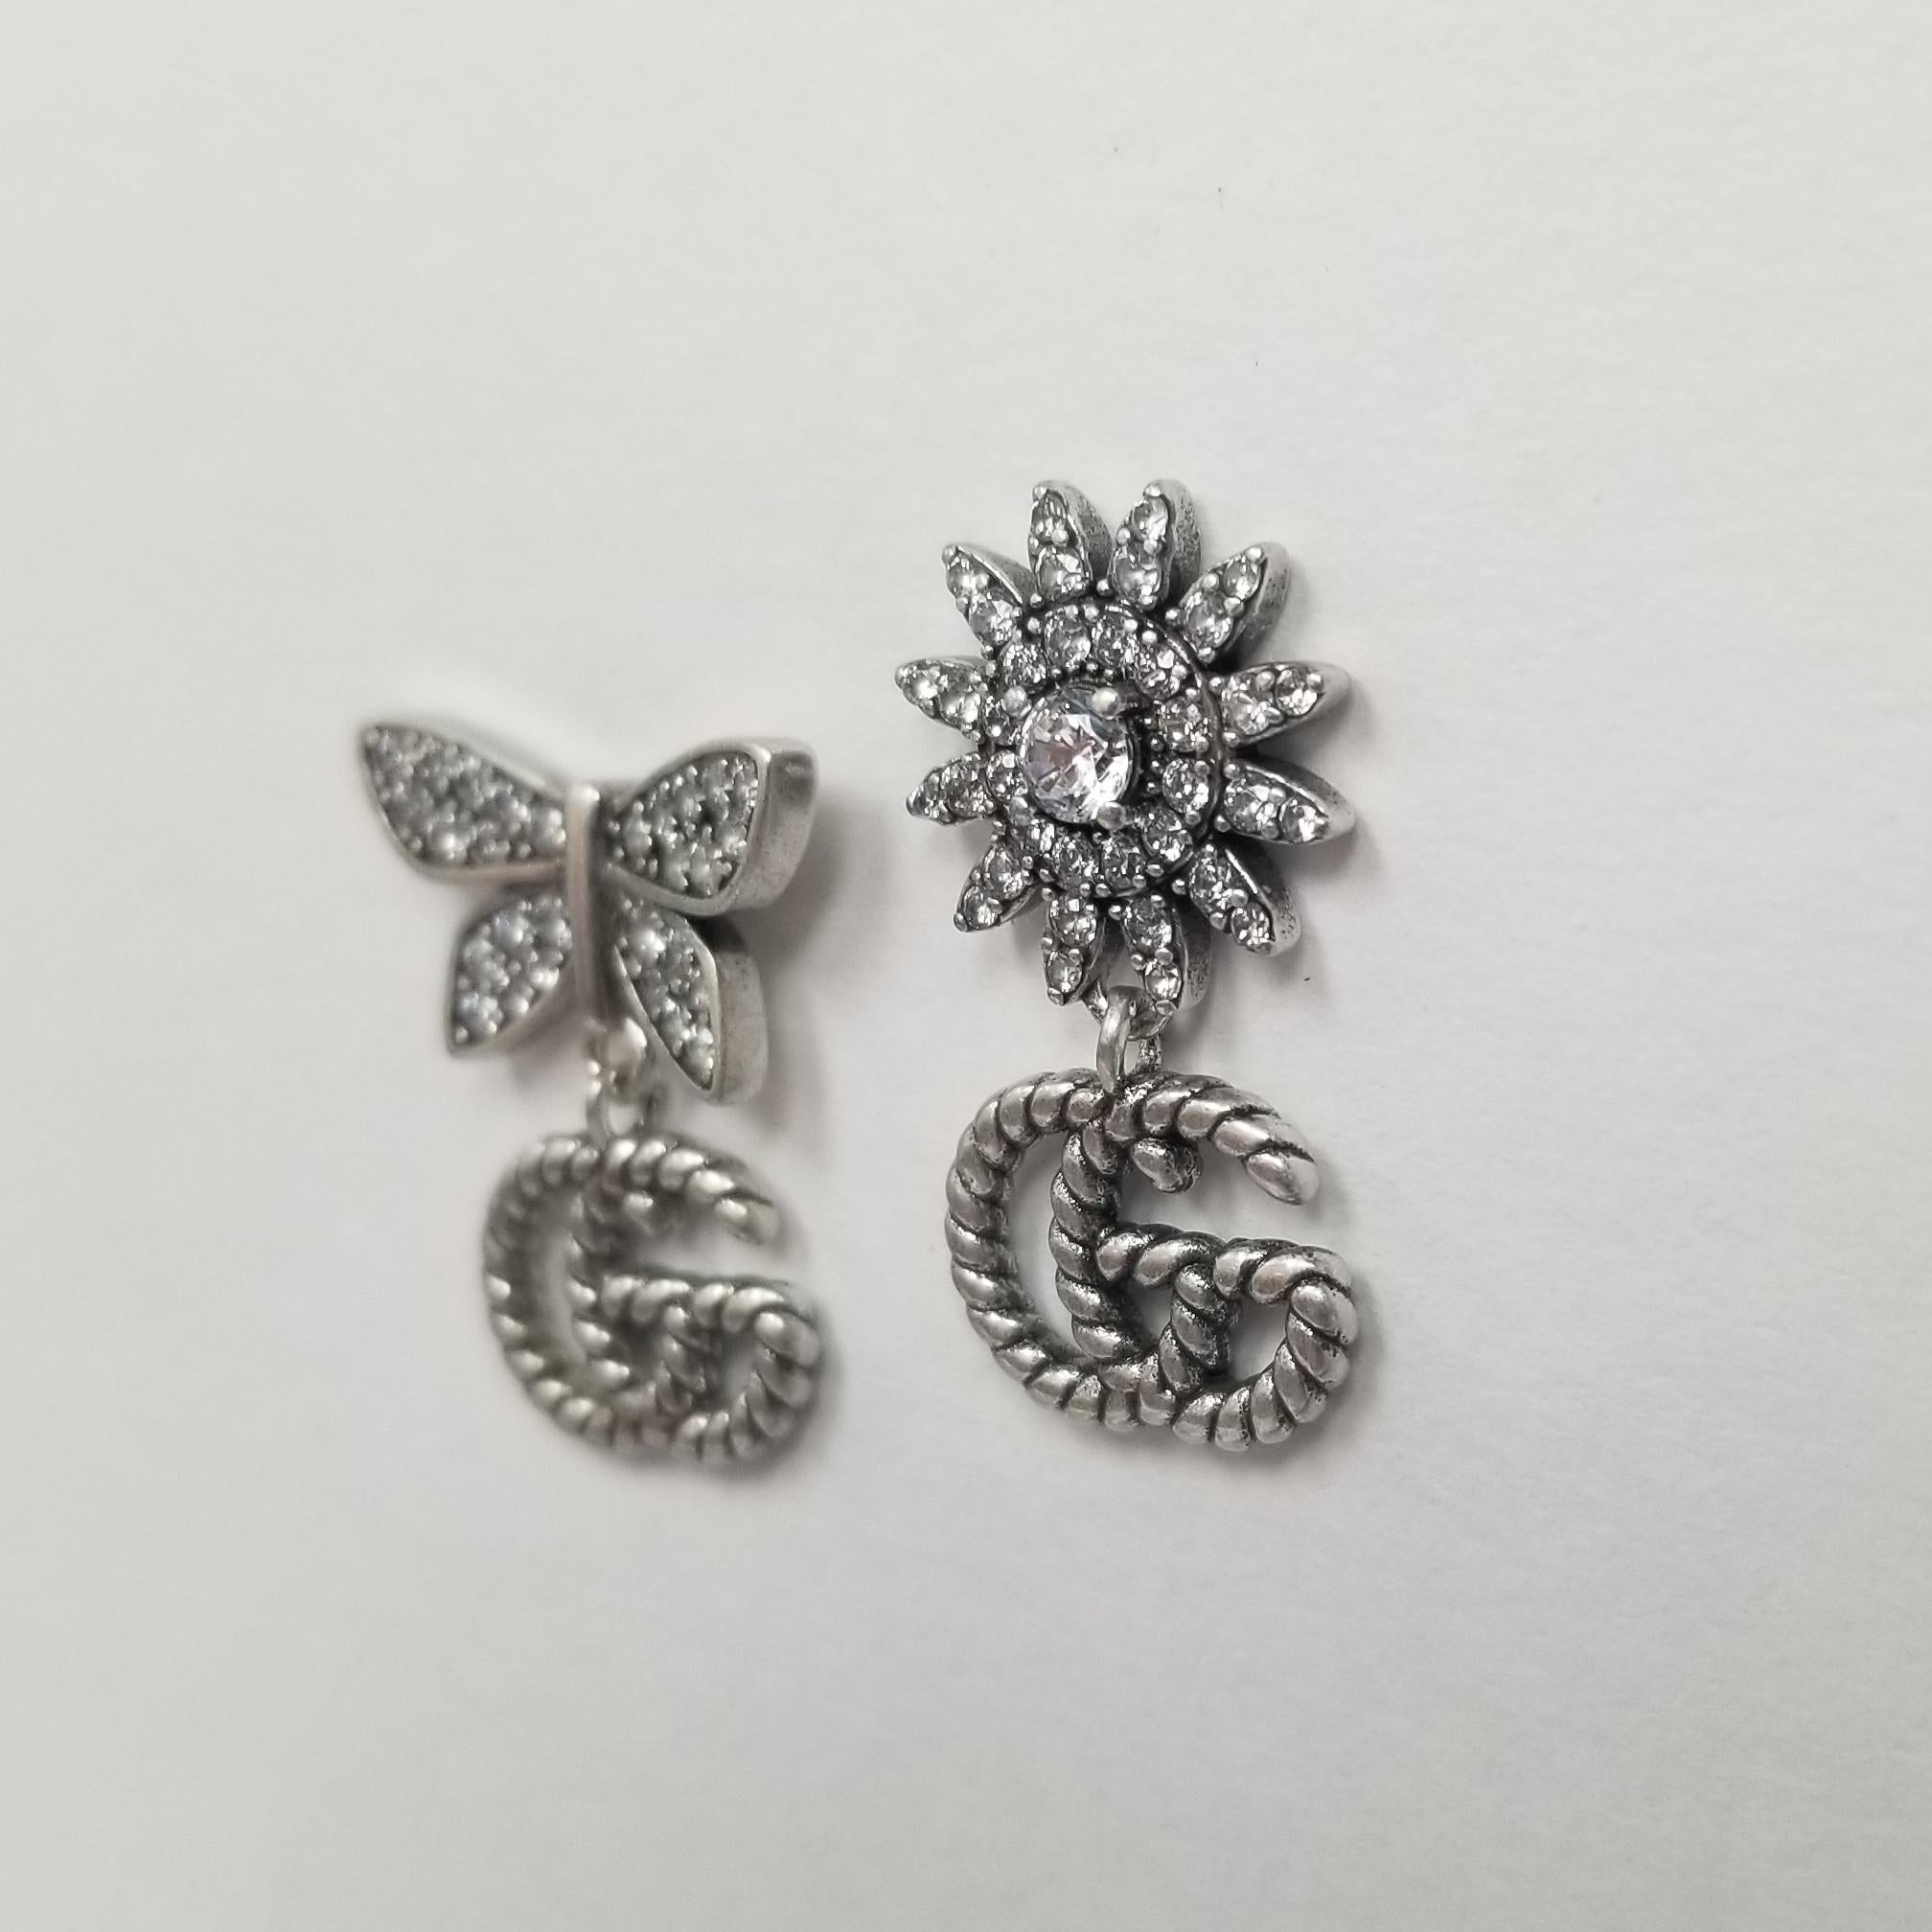 These Gucci earrings from the Flora collection are a mismatch made in heaven! Crafted in Metal Gold Plated with dazzling crystals, the top of one of the earrings resembles a flower, while the other sports a crystal butterfly. A 